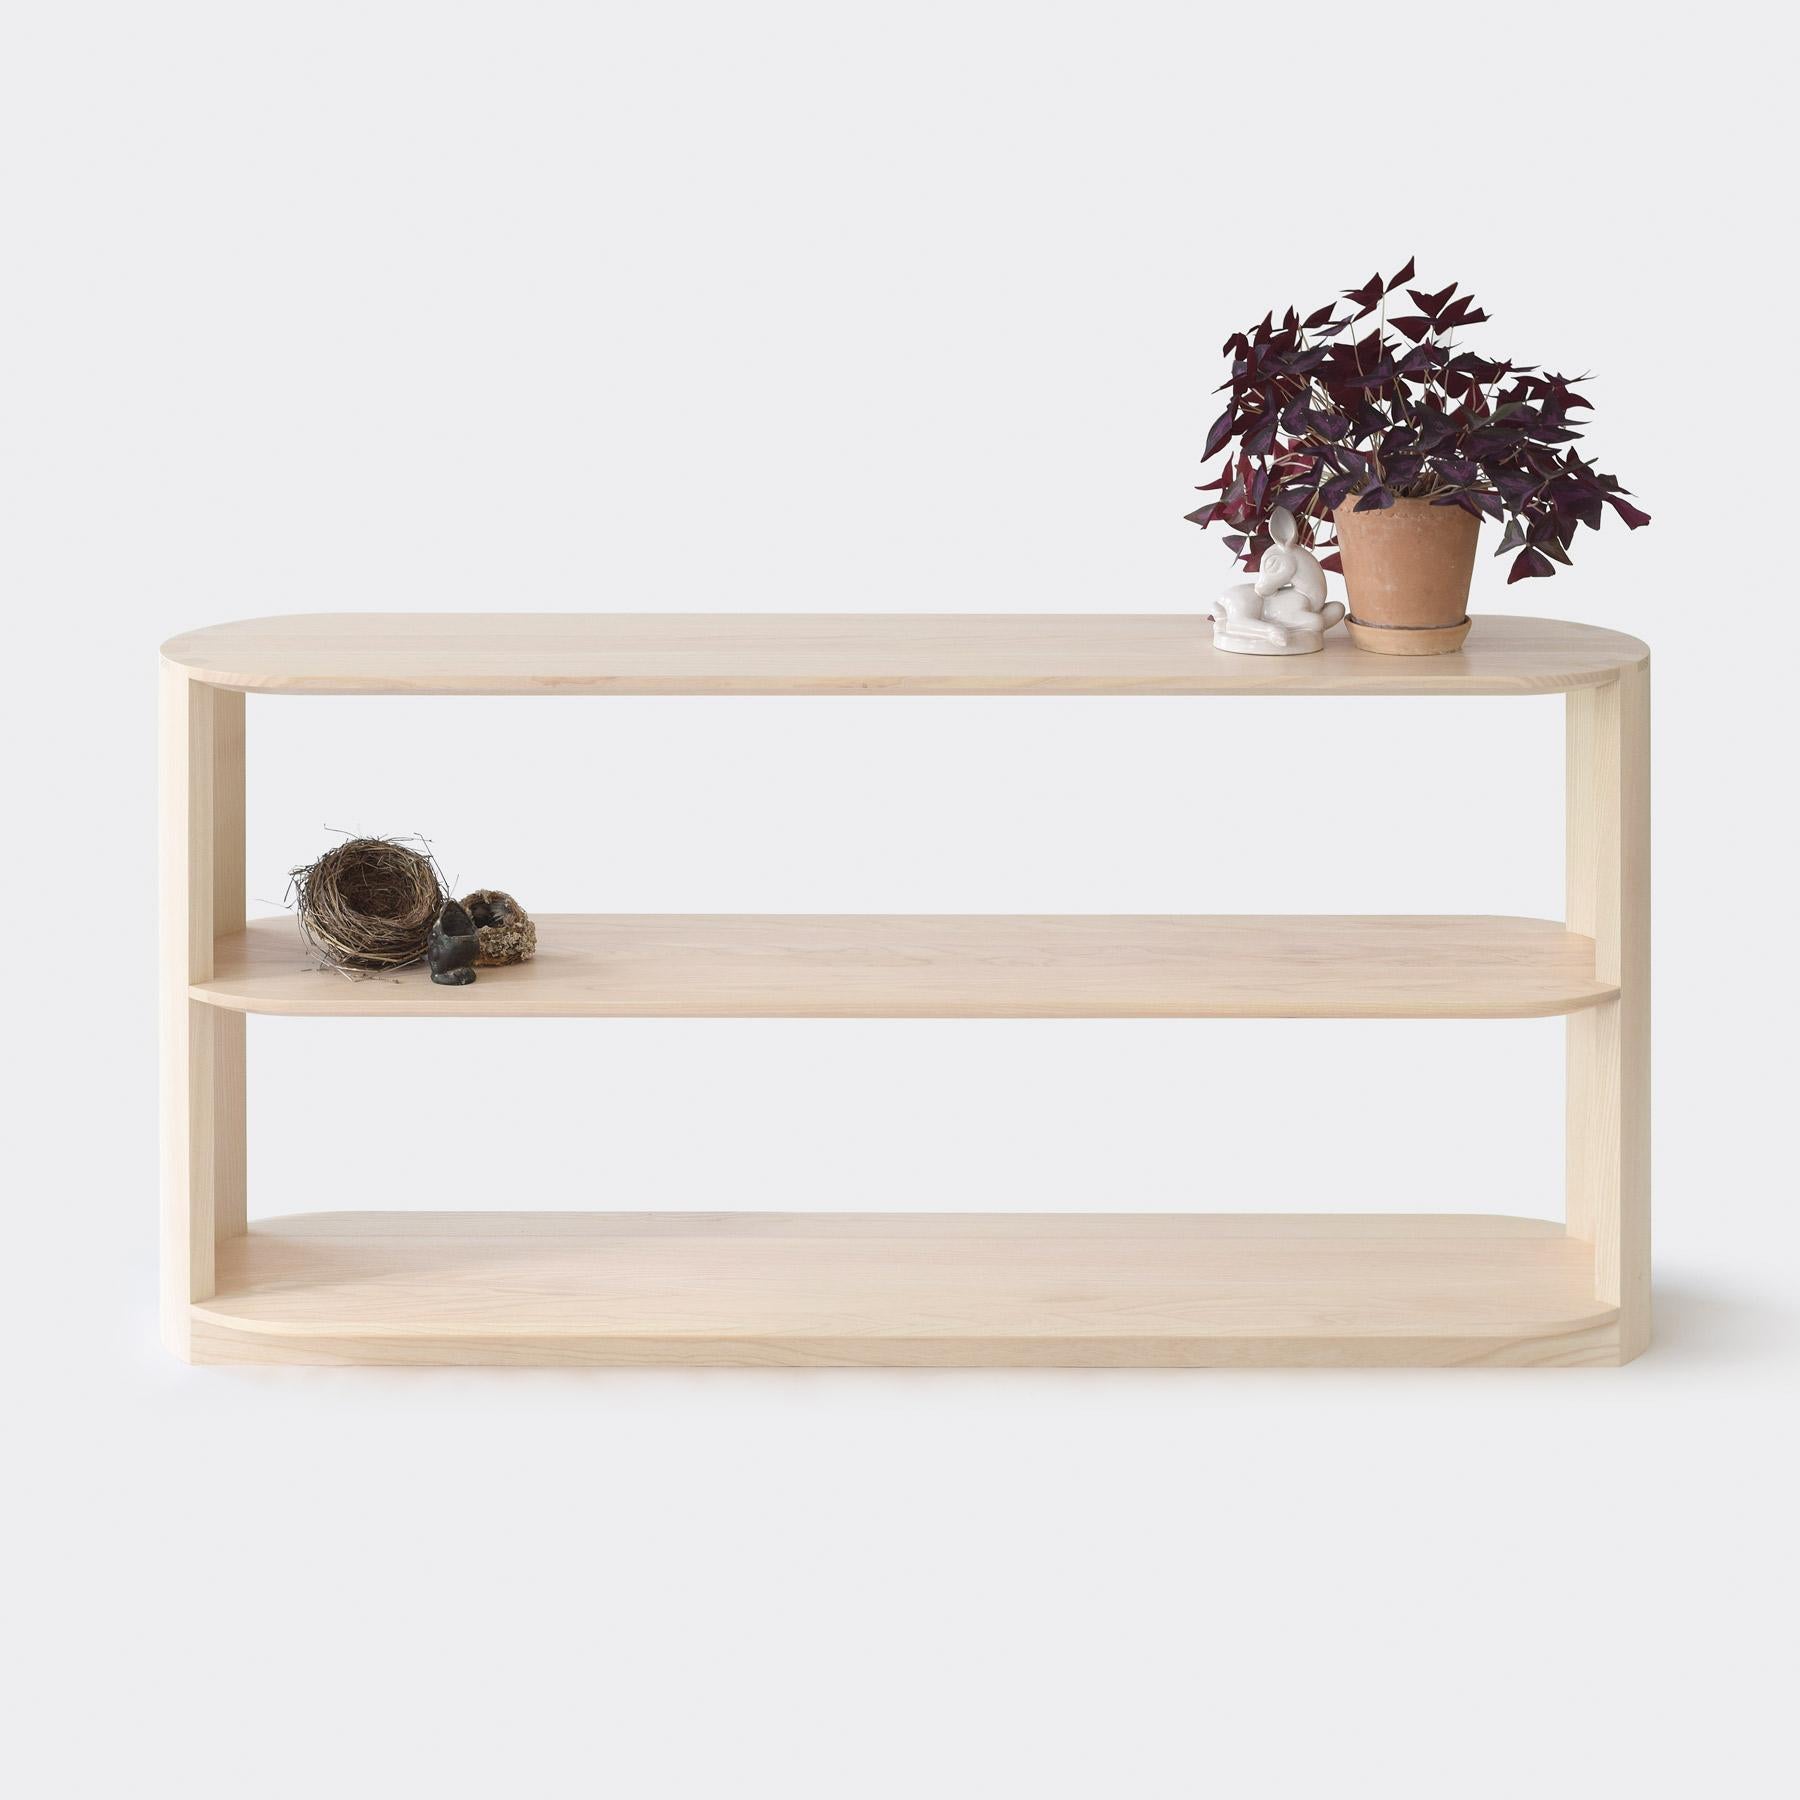 Haiku shelf in Scandinavian contemporary style is made in solid wood with modern cns-technique and traditional craftsmanship to manifest a product with estetic simplicity and outstanding detailing.
Haiku shelf, like the Japanese verse form, haiku,